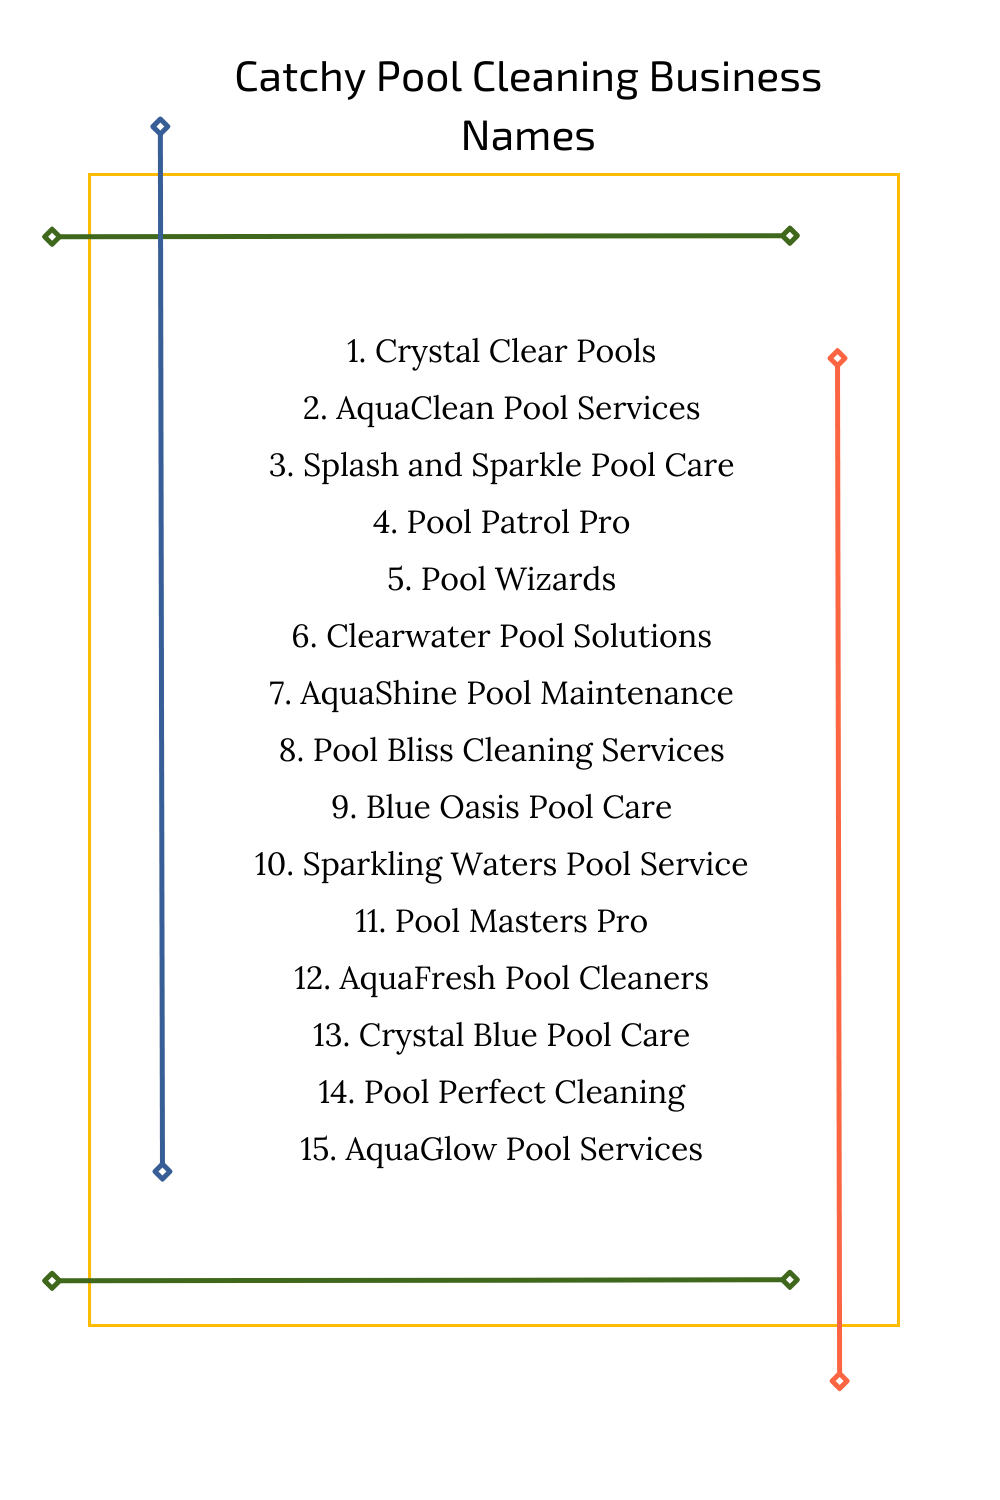 Catchy Pool Cleaning Business Names